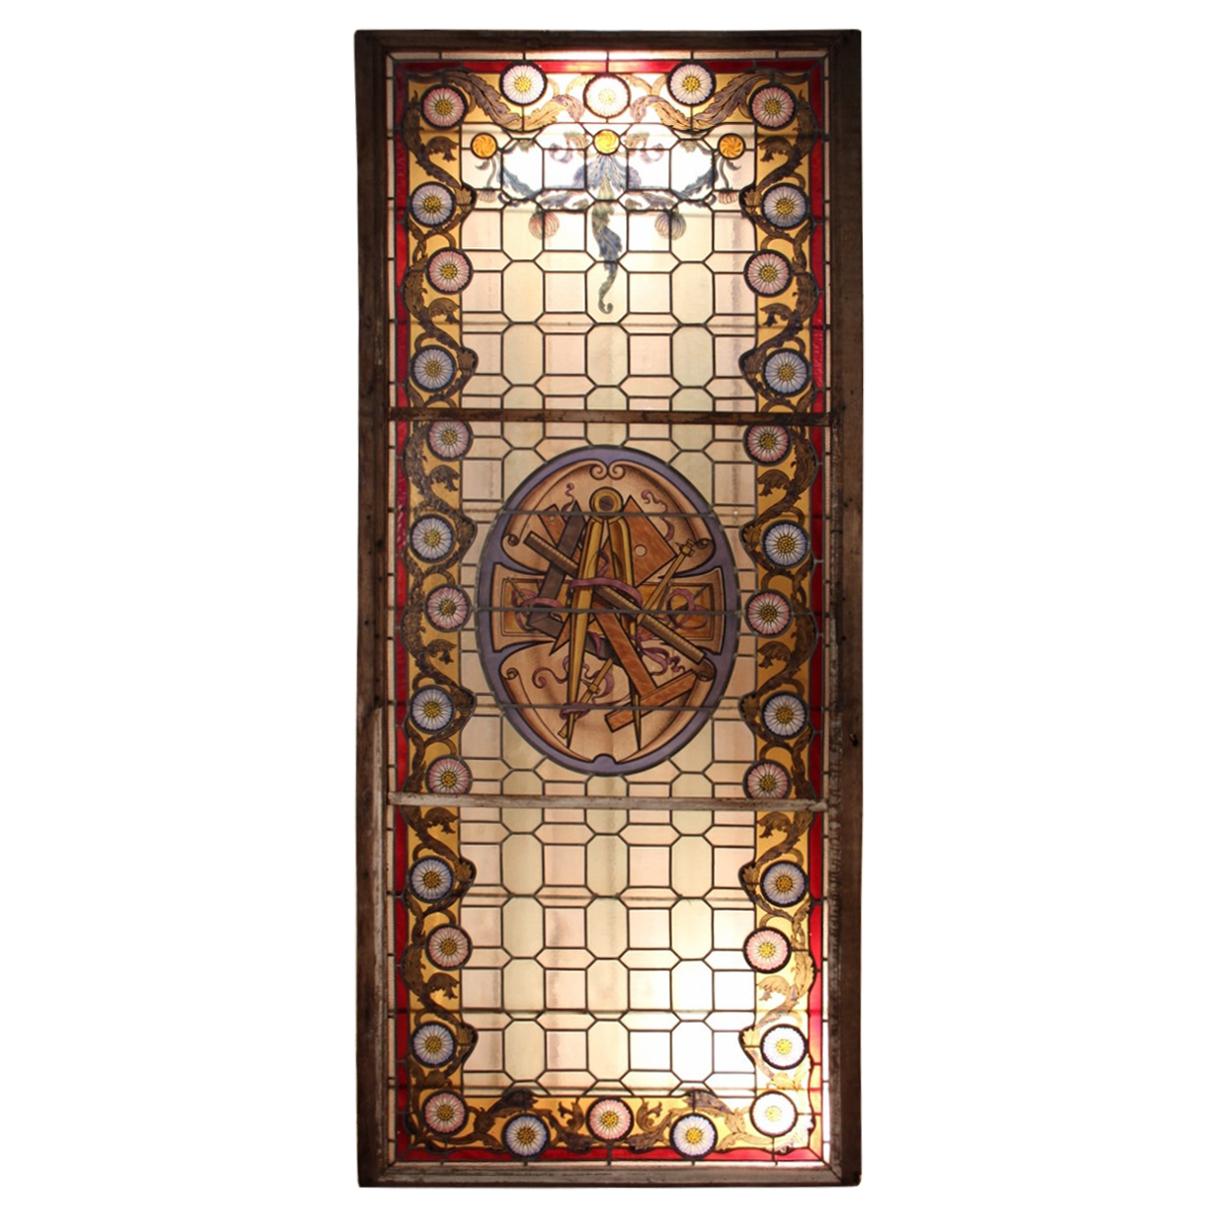 Large Masonic Stained Glass Signed from Champigneulle